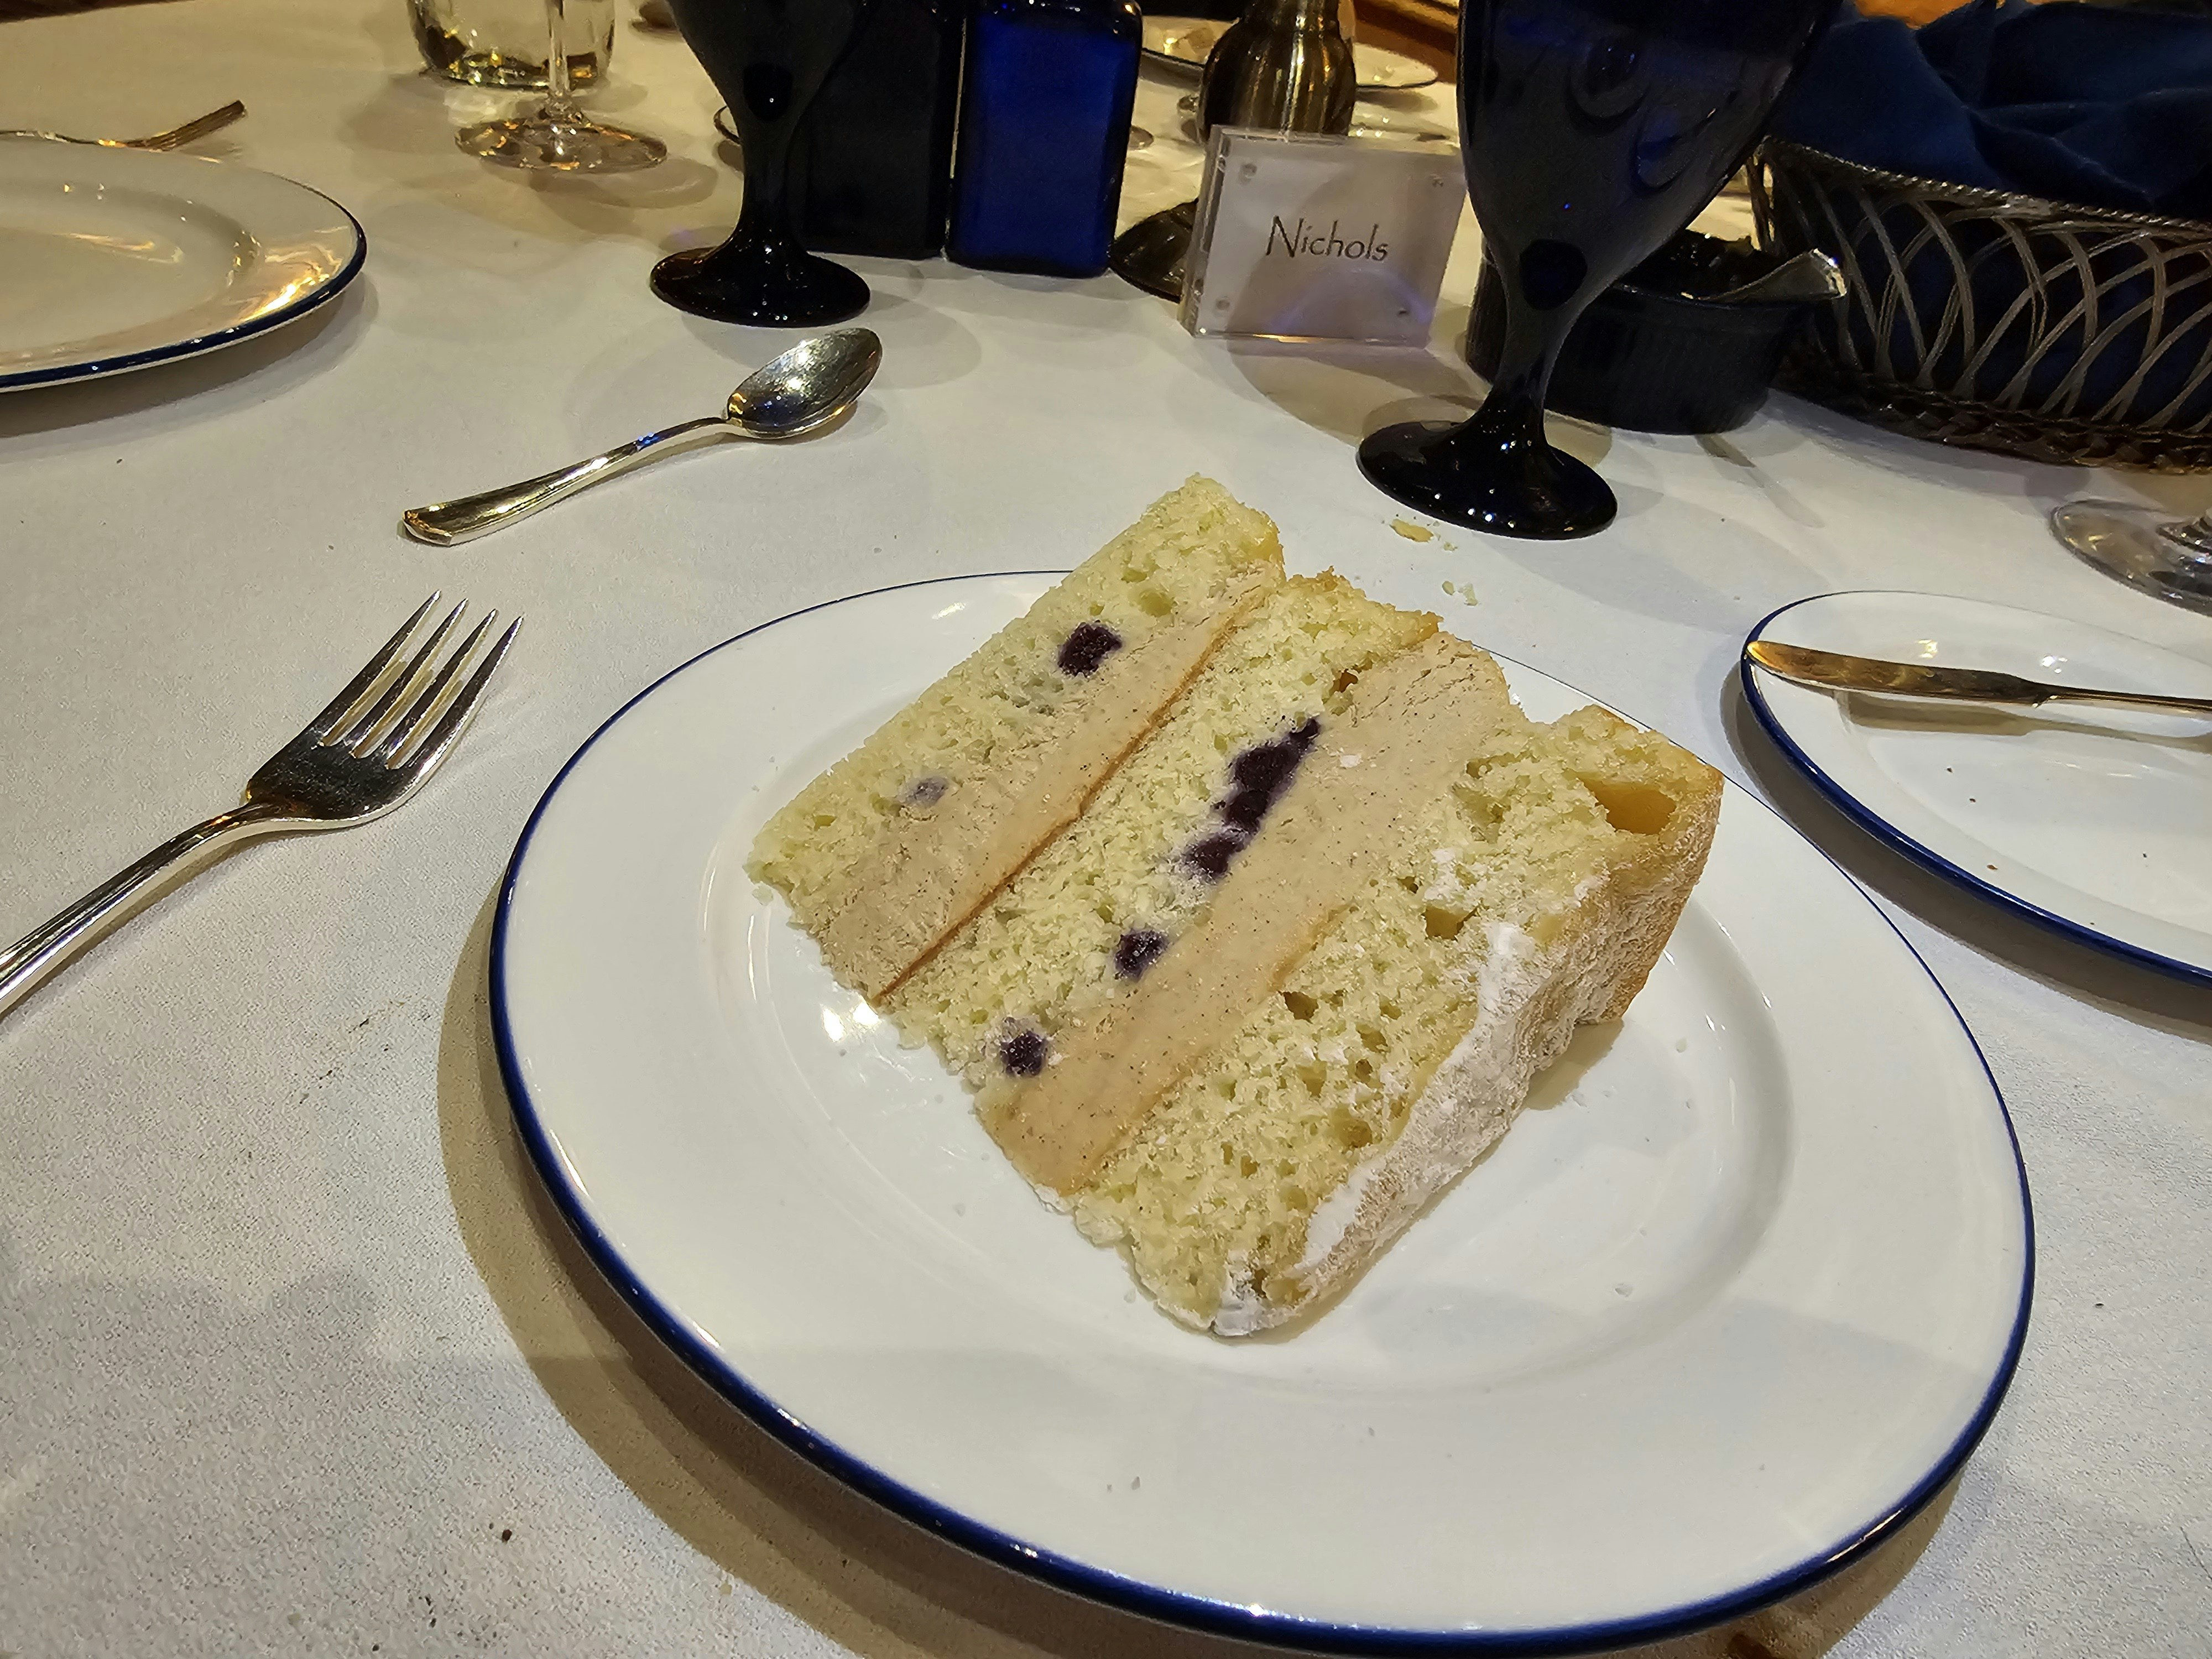 A blueberry pancake cake. Yes, it was delicious.